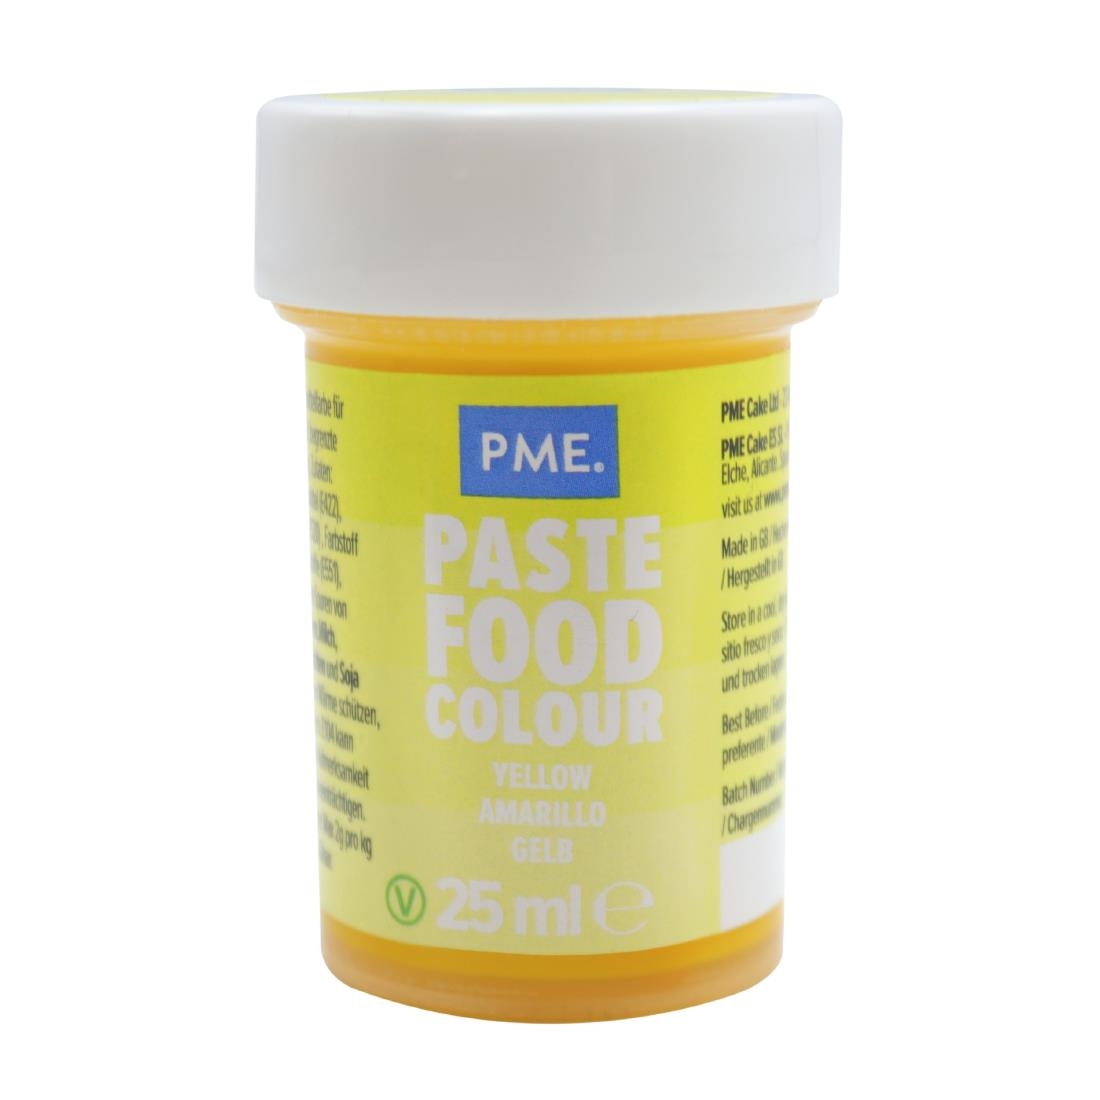 PME Concentrated Paste Food Colour - Sunny Yellow 25g (HU318)